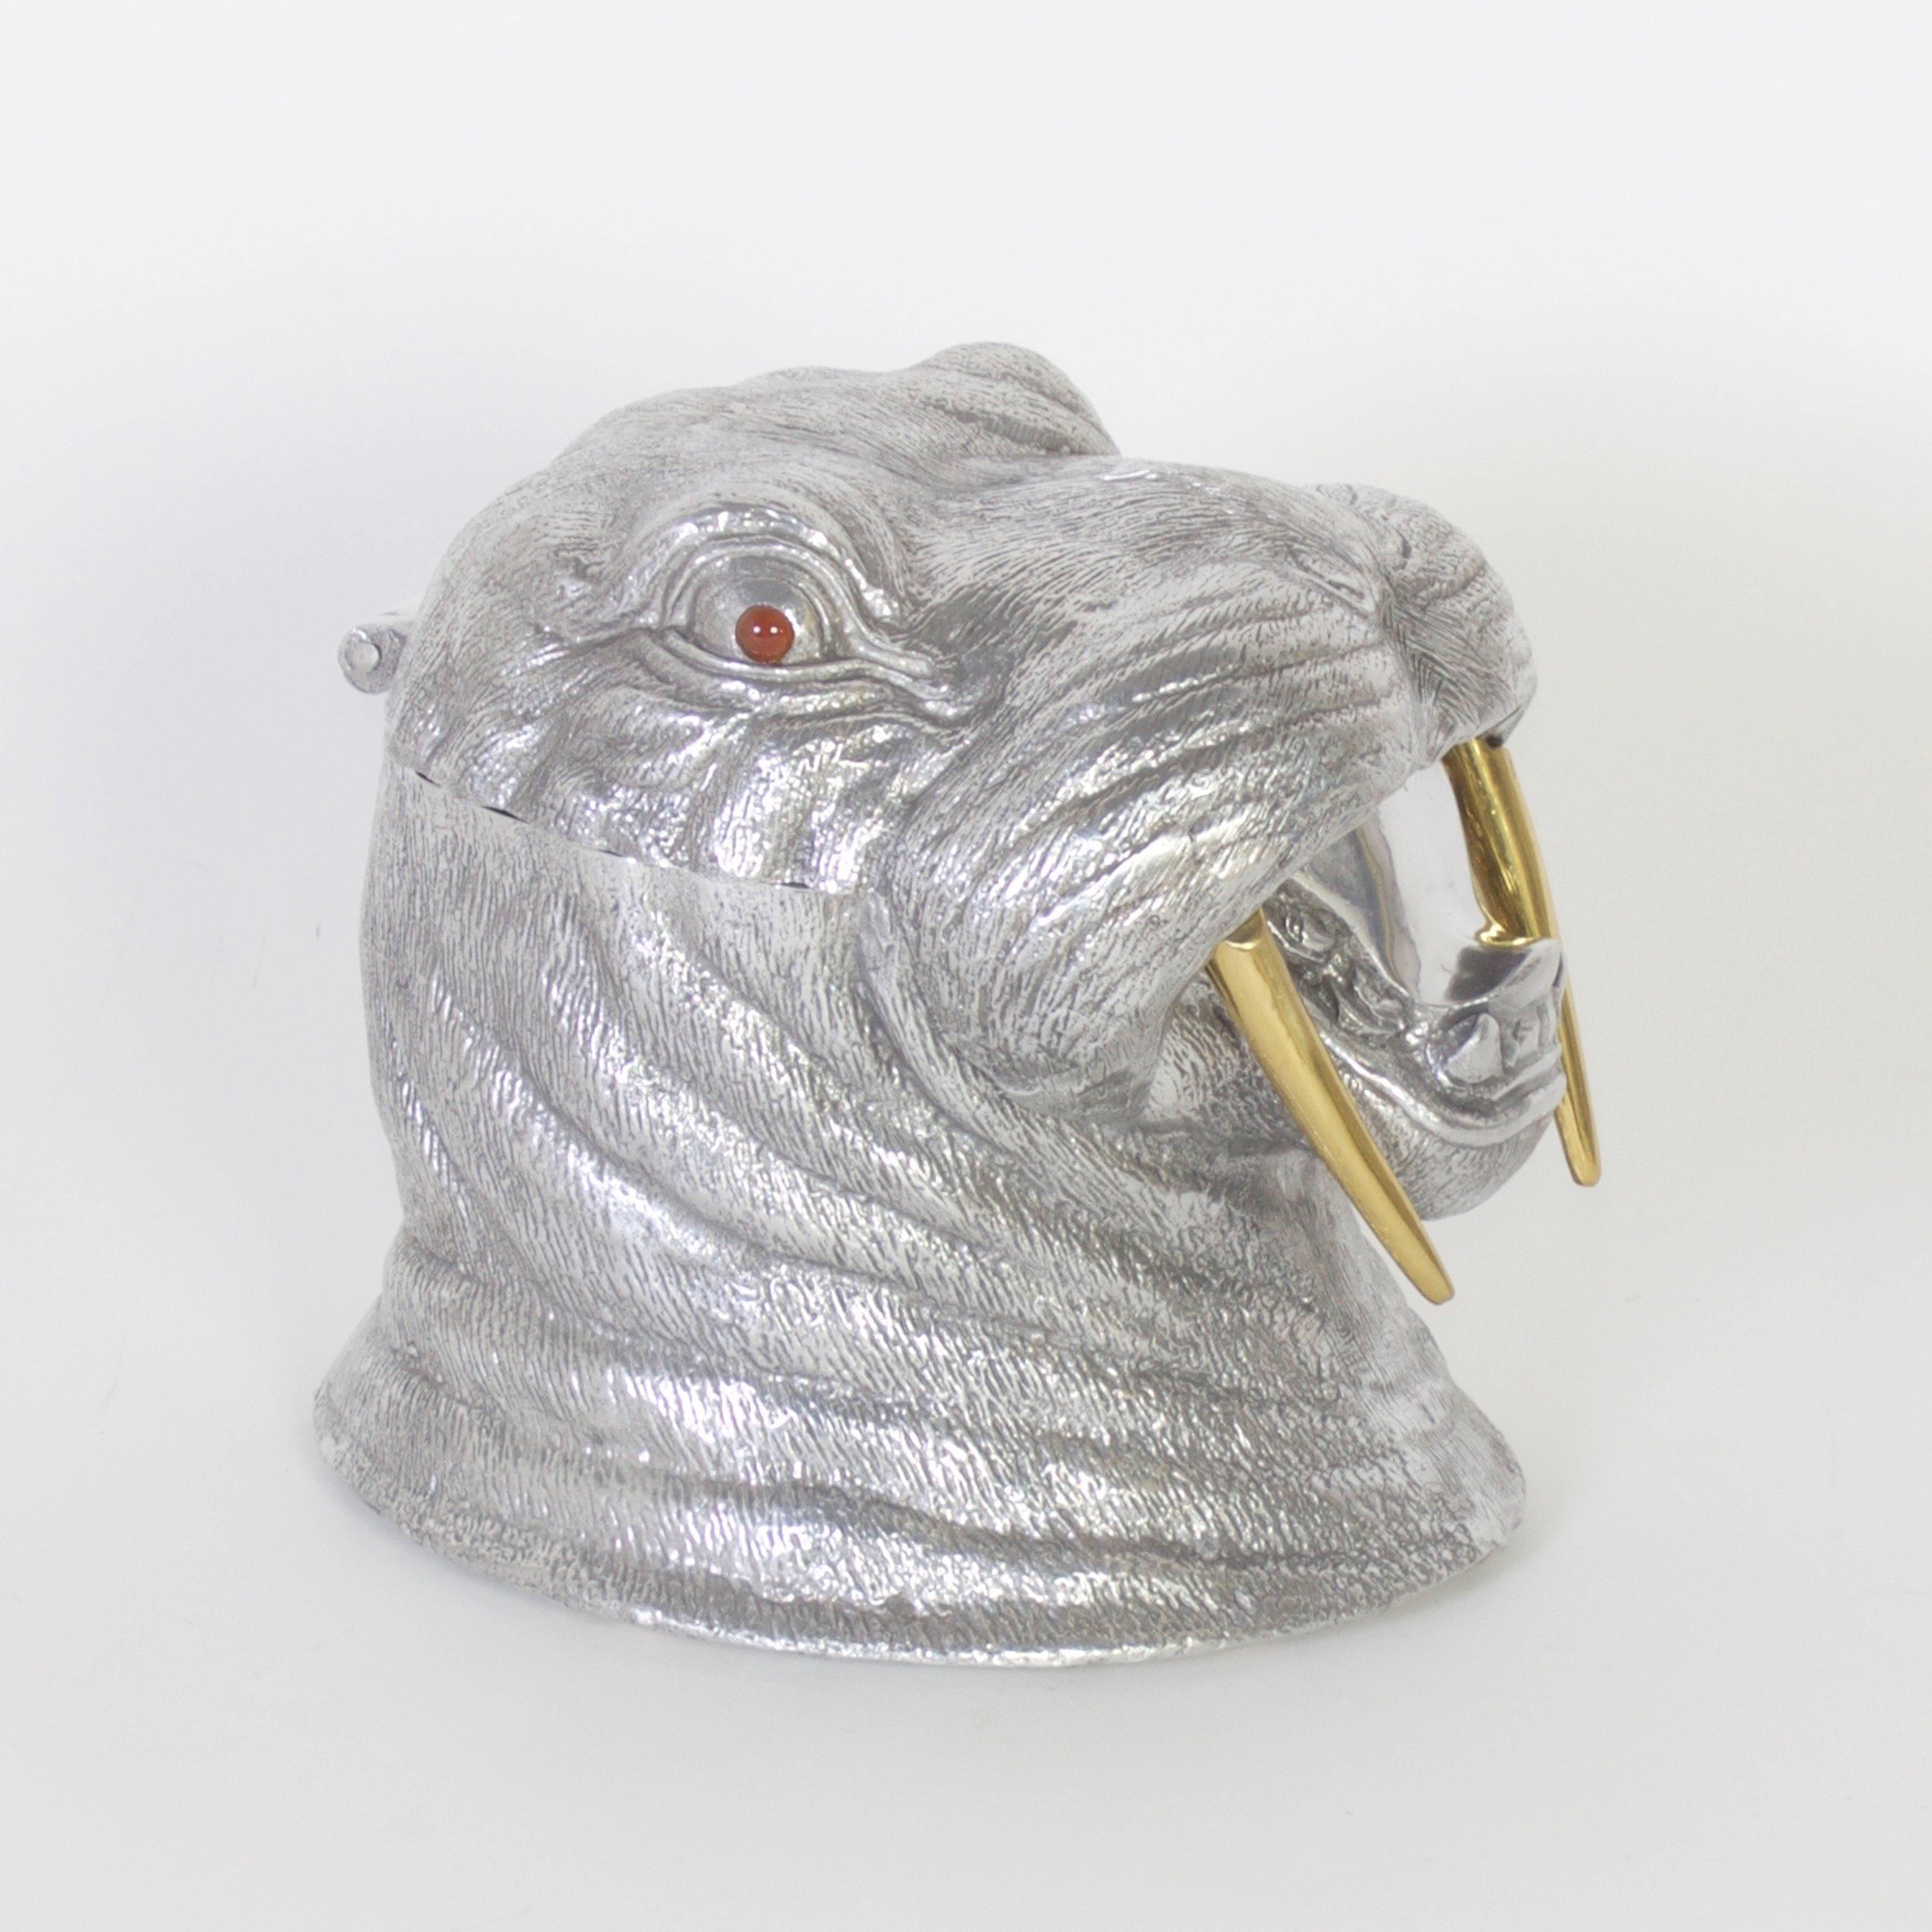 Arthur Court cast aluminum ice bucket depicting a walrus head that manages to look friendly and amusing while showing off his formidable brass tusks. Signed Arthur Court 1982 on the bottom.
 